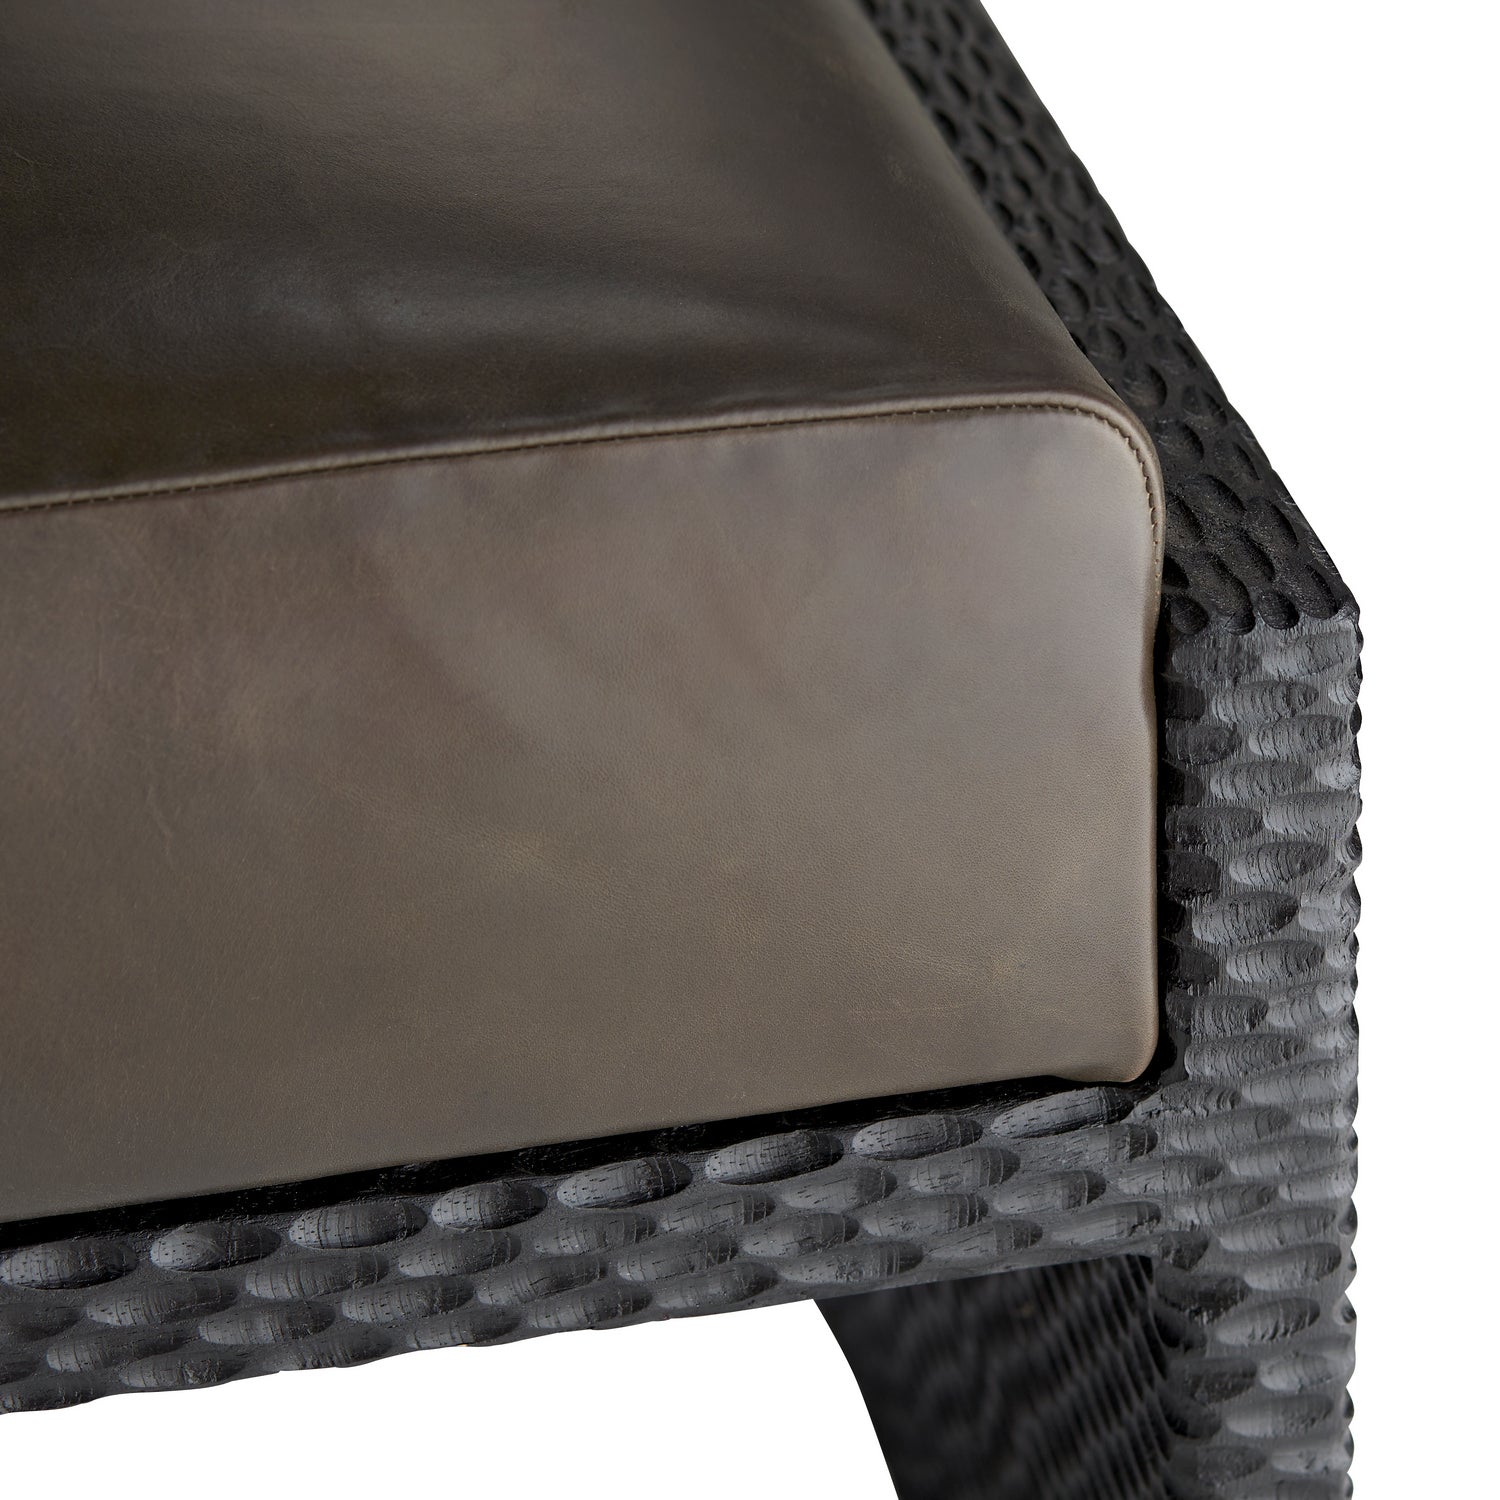 Ottoman from the Isaiah collection in Graphite finish